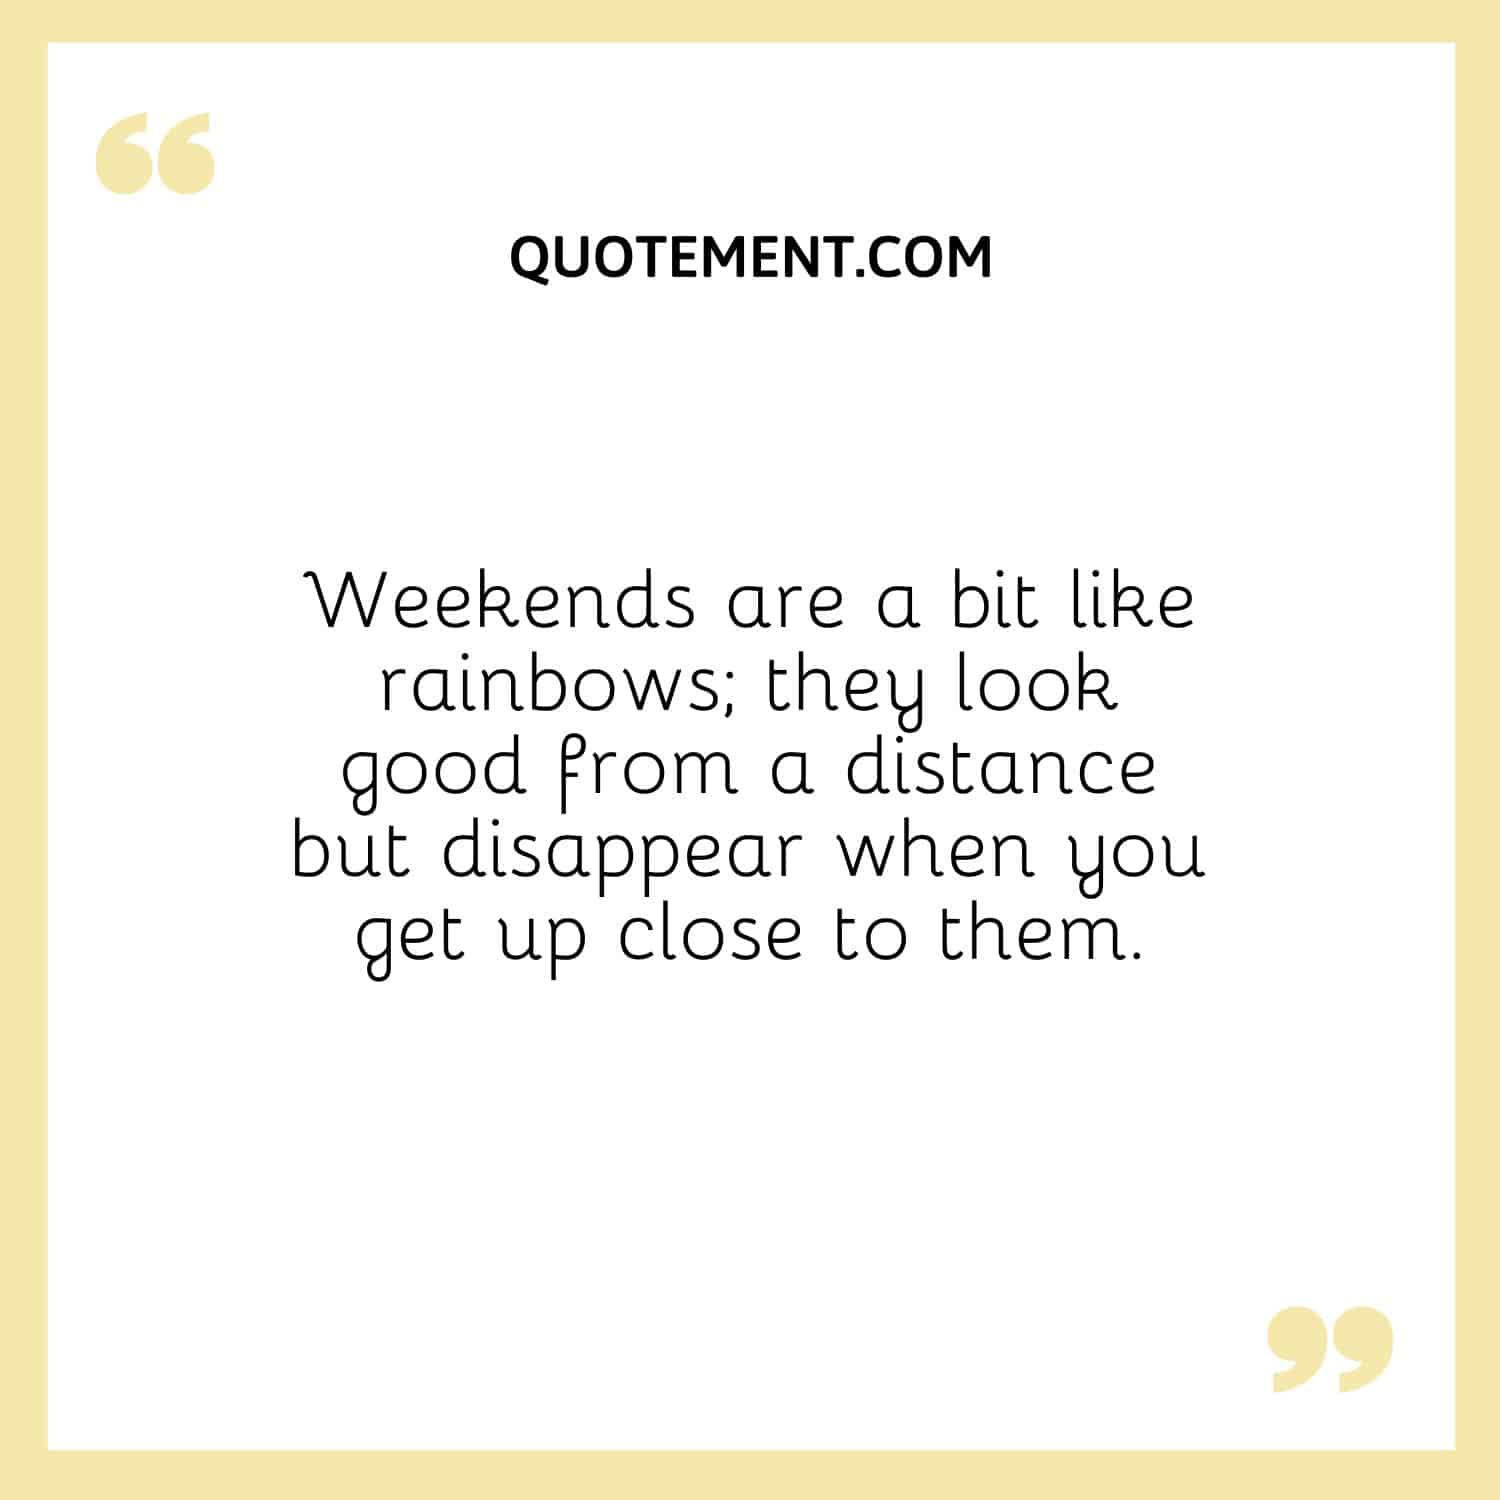 Weekends are a bit like rainbows